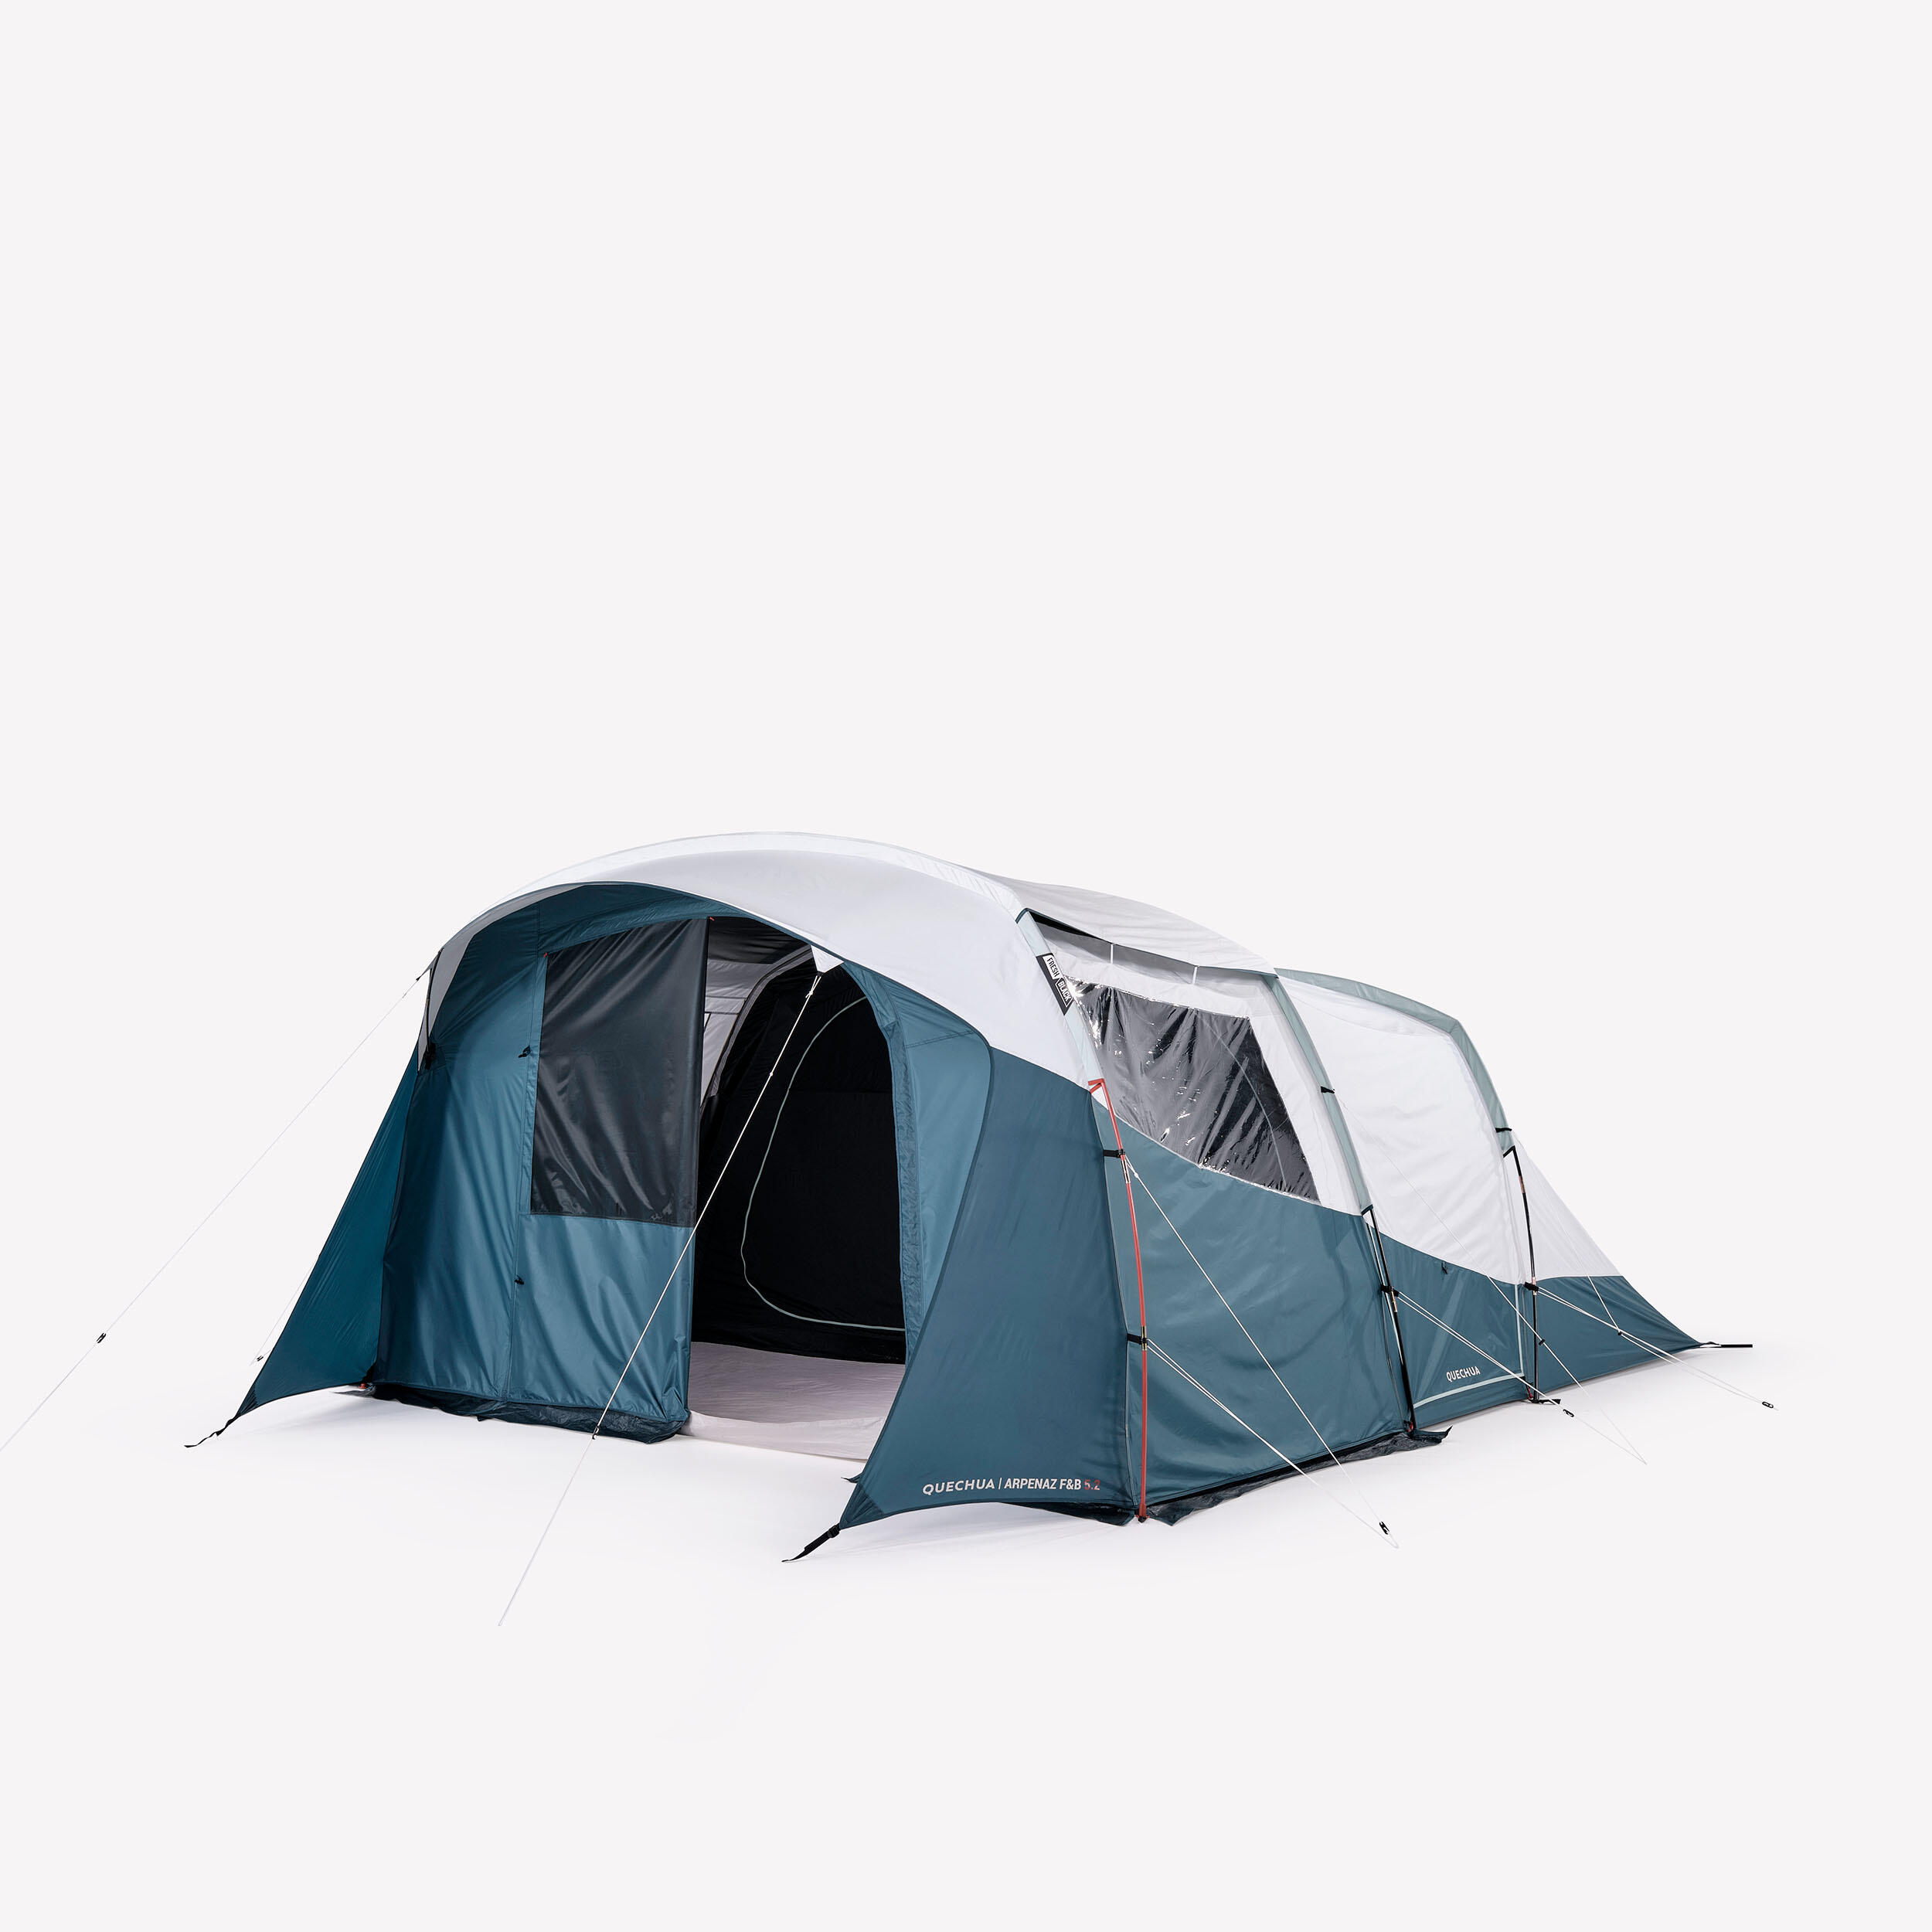 QUECHUA Camping tent with poles - Arpenaz 5.2 F&B - 5 Person - 2 Bedrooms